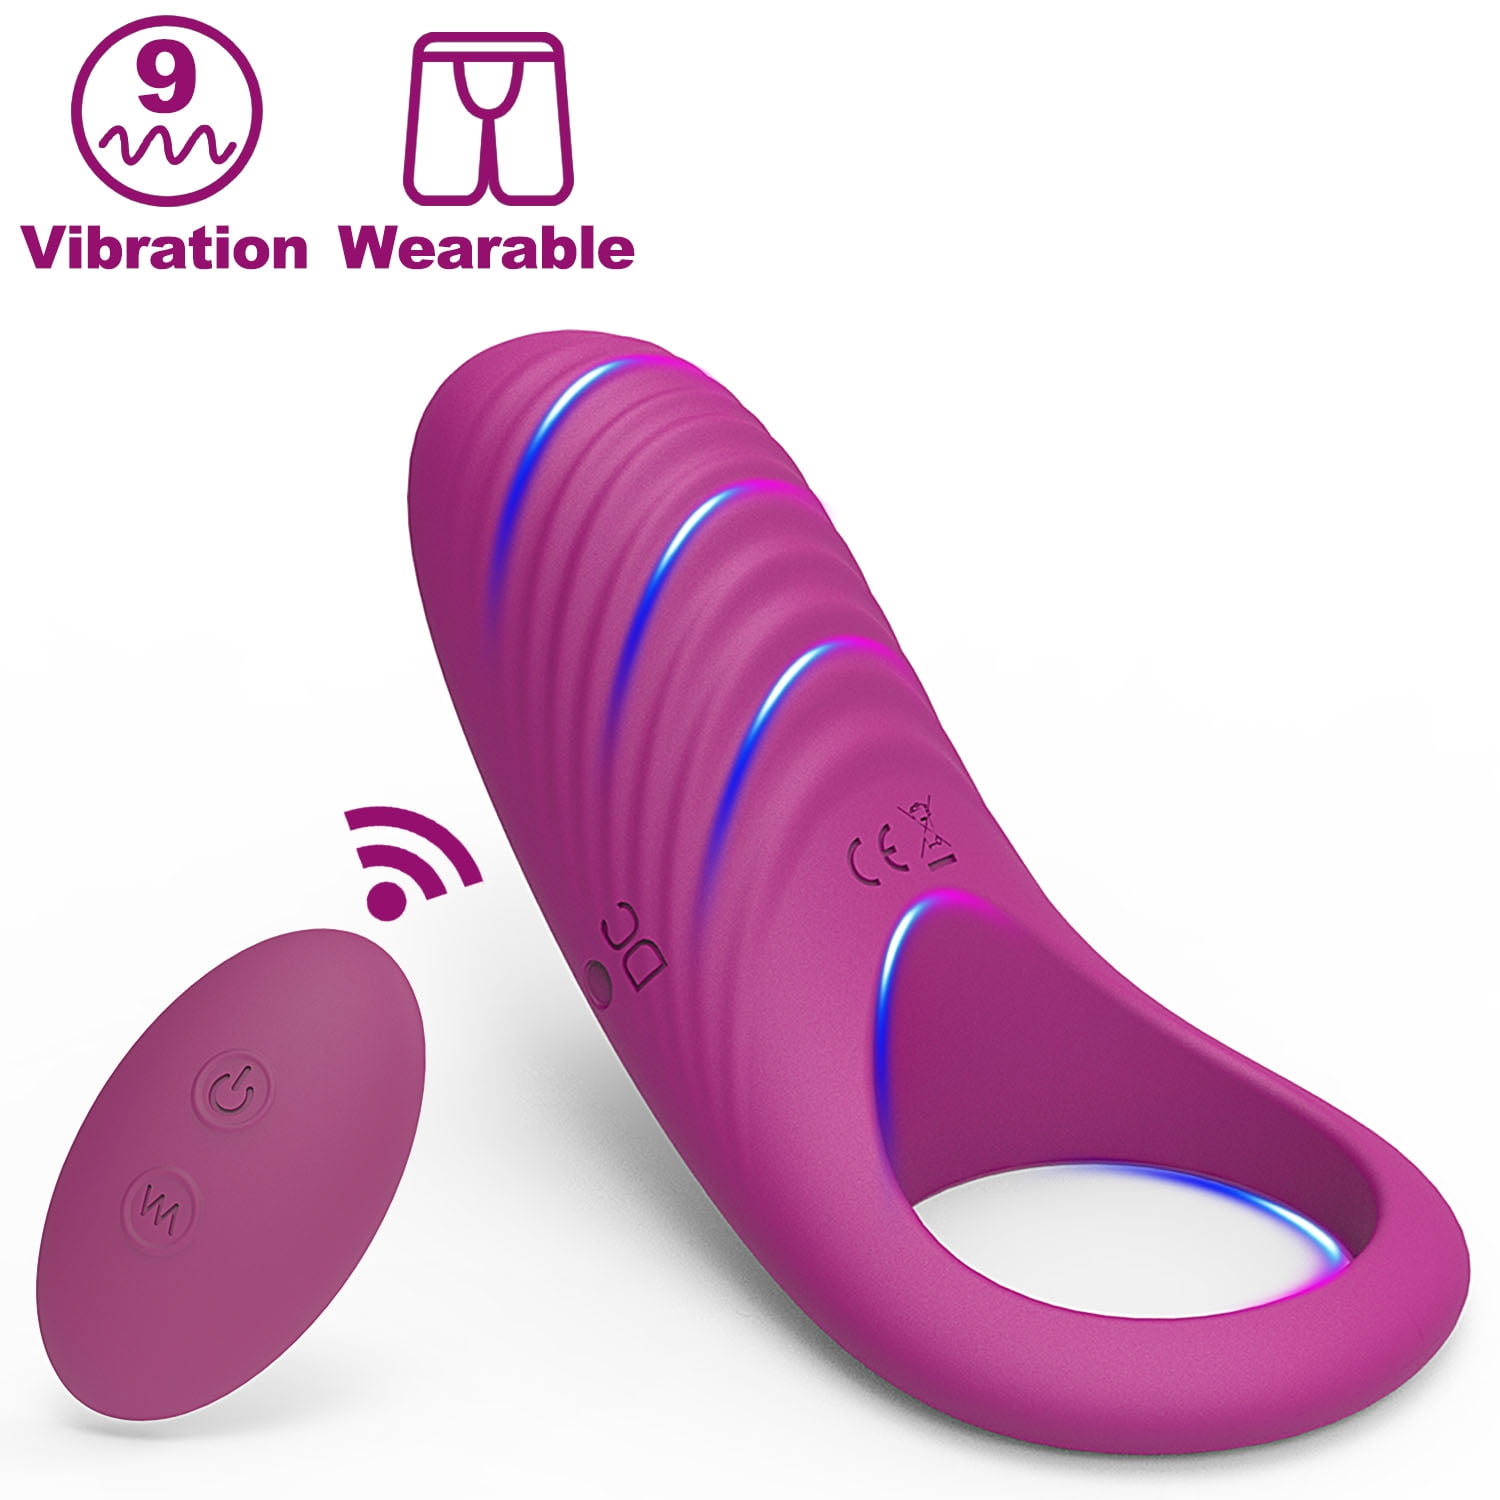 HMT Vibrator Thrusting Dildo Rabbit Vibrator for Women, G Spot Stimulator Sex Toys with Powerful Vibration and Tongue Licking Modes Telescopic and Heating Function,4 IN 1 Waterproof Adult Toy for Couples -